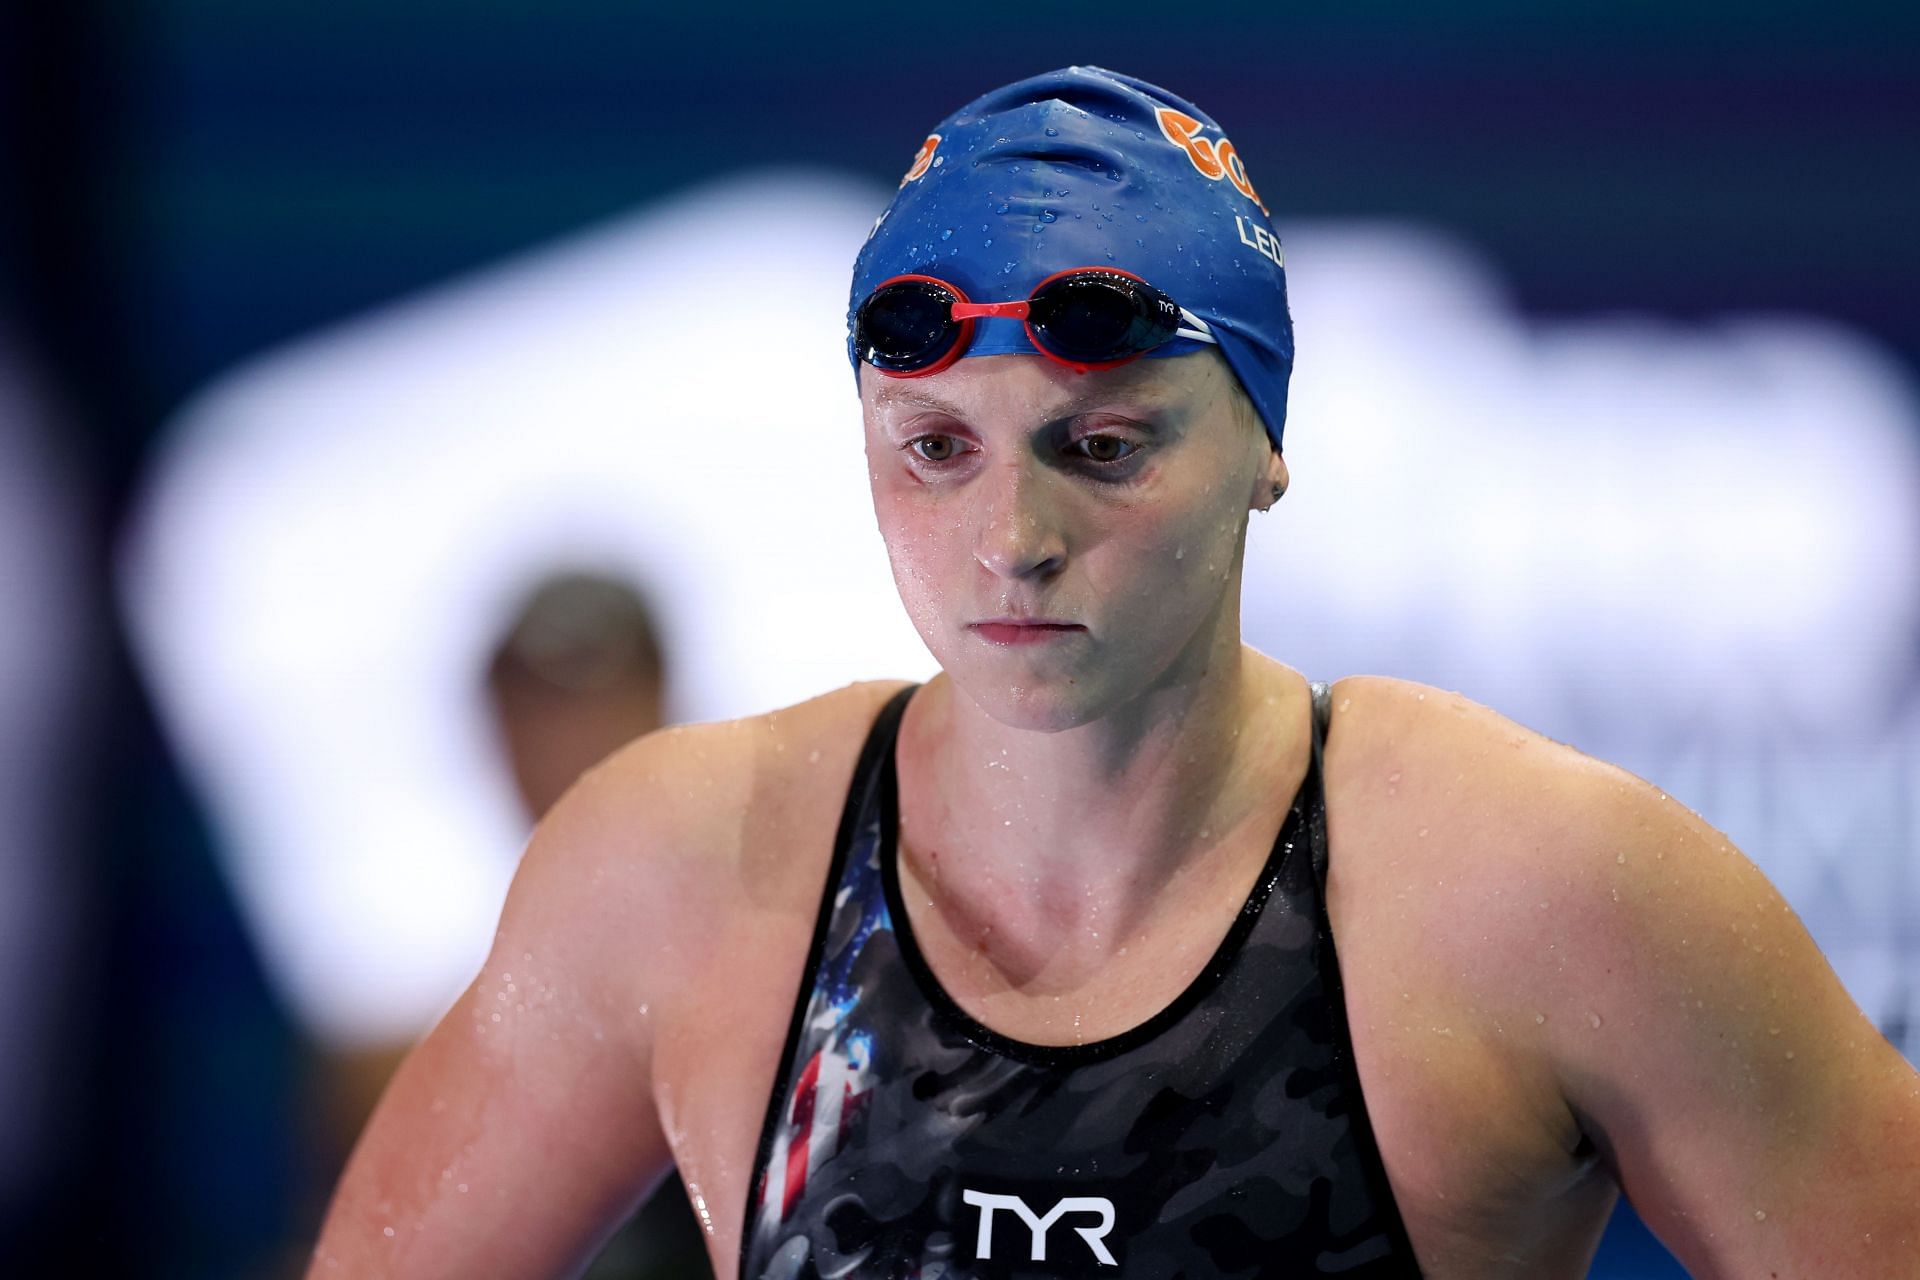 Katie Ledecky's world record in 800m freestyle